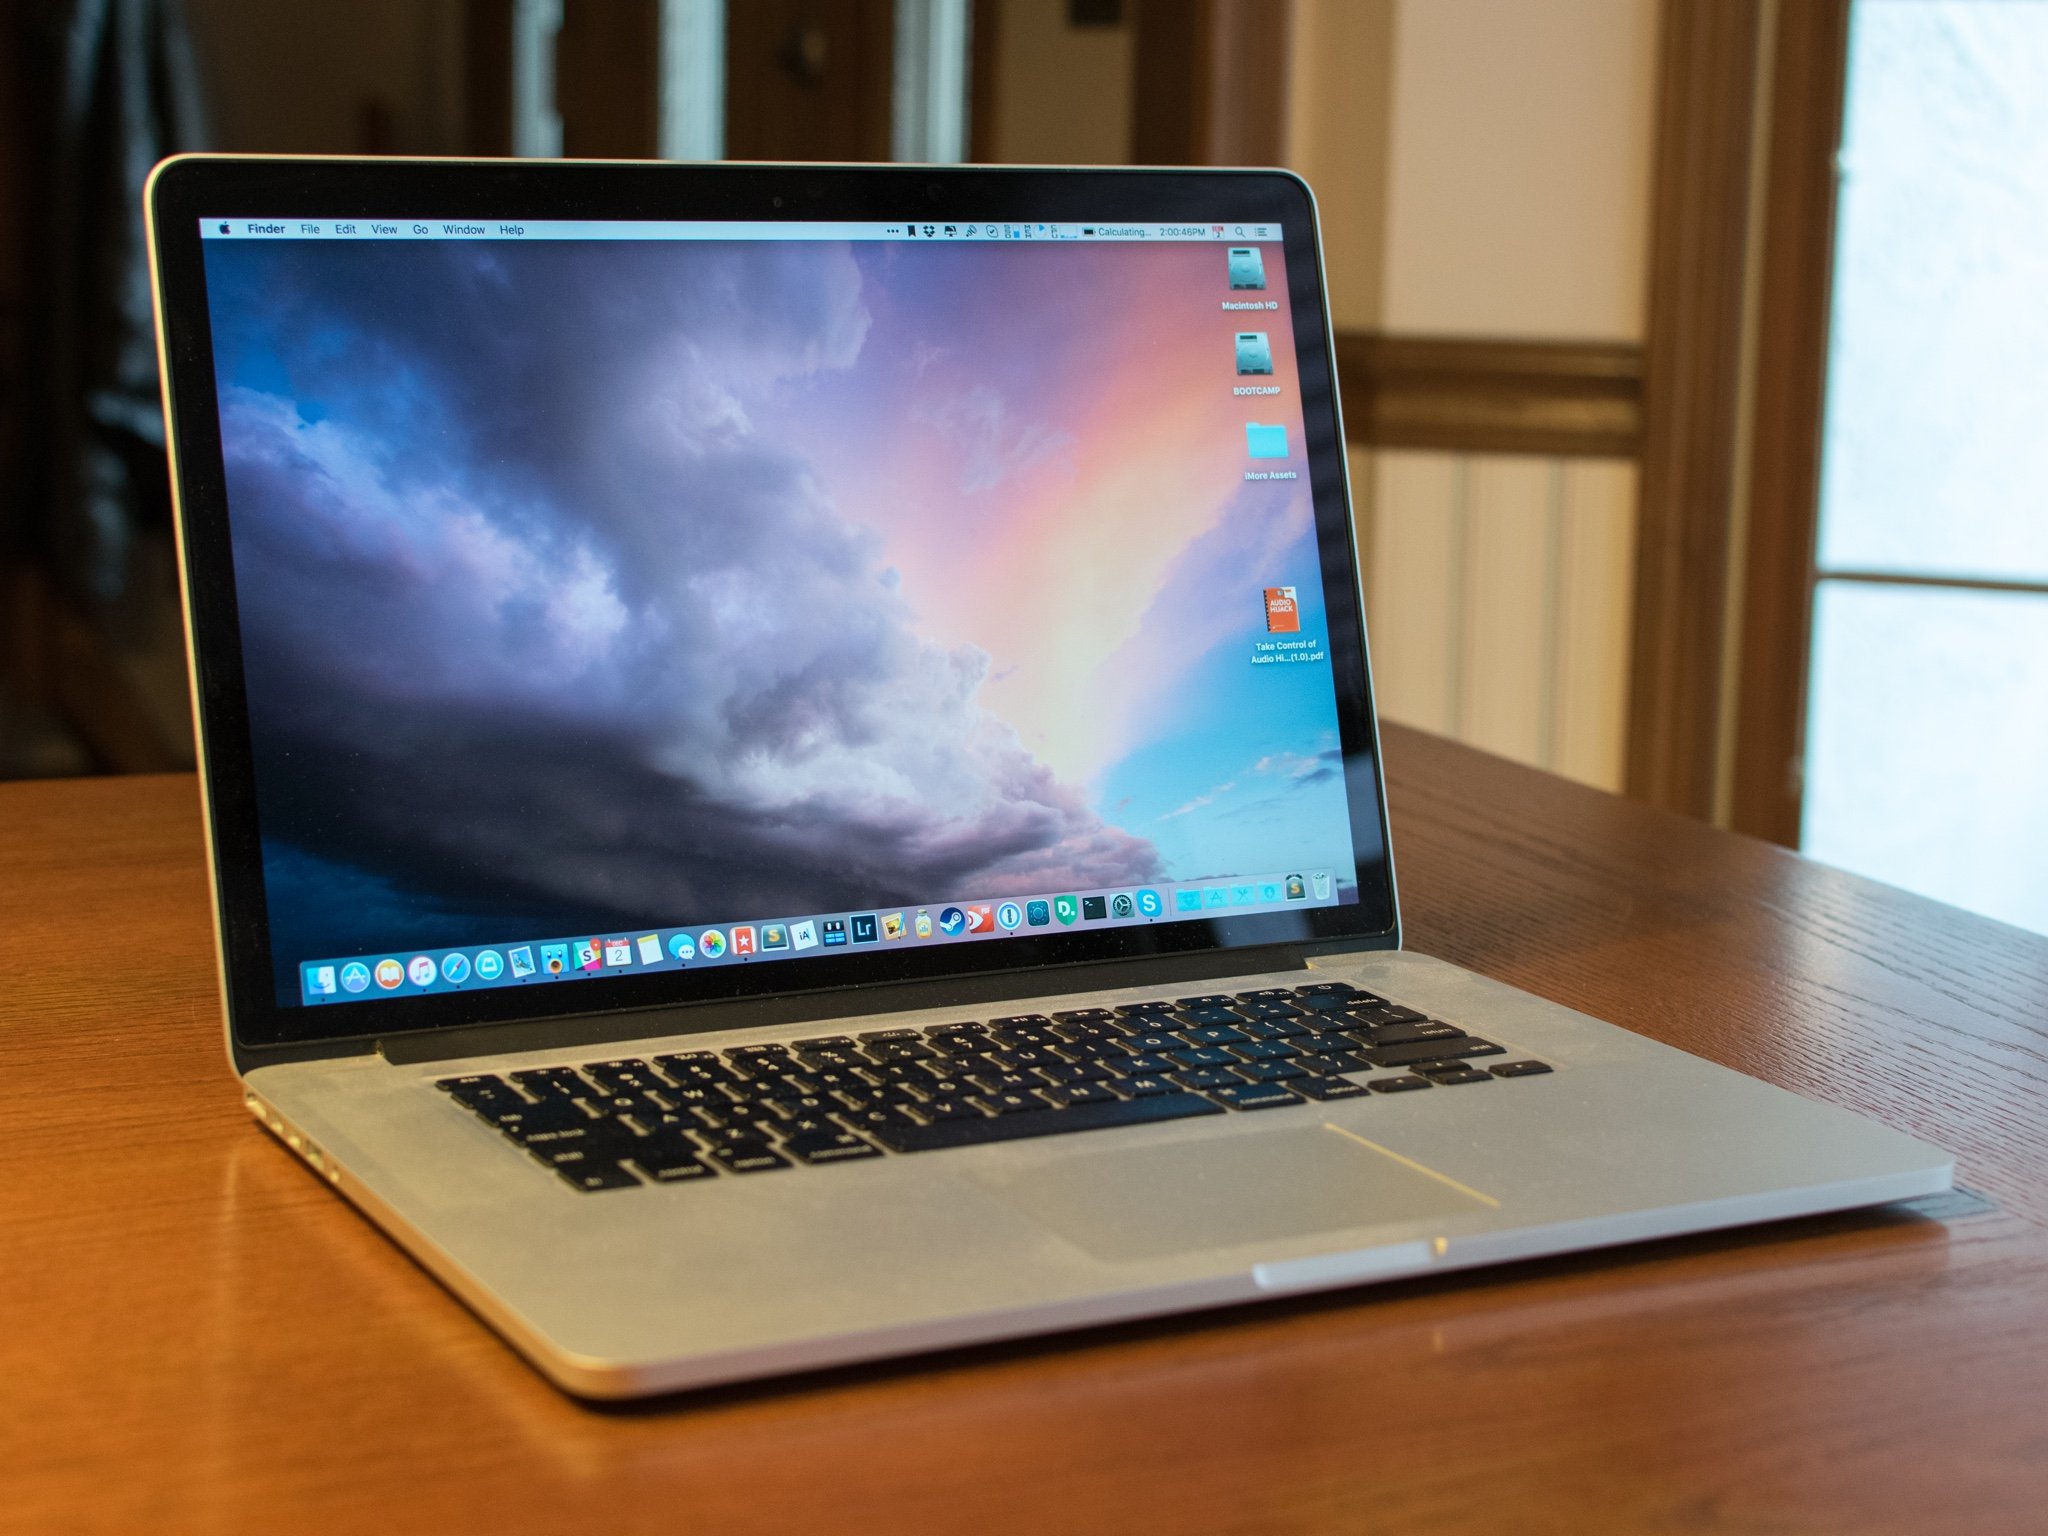 The mid-2012 13-inch MacBook Pro will soon be listed as vintage 